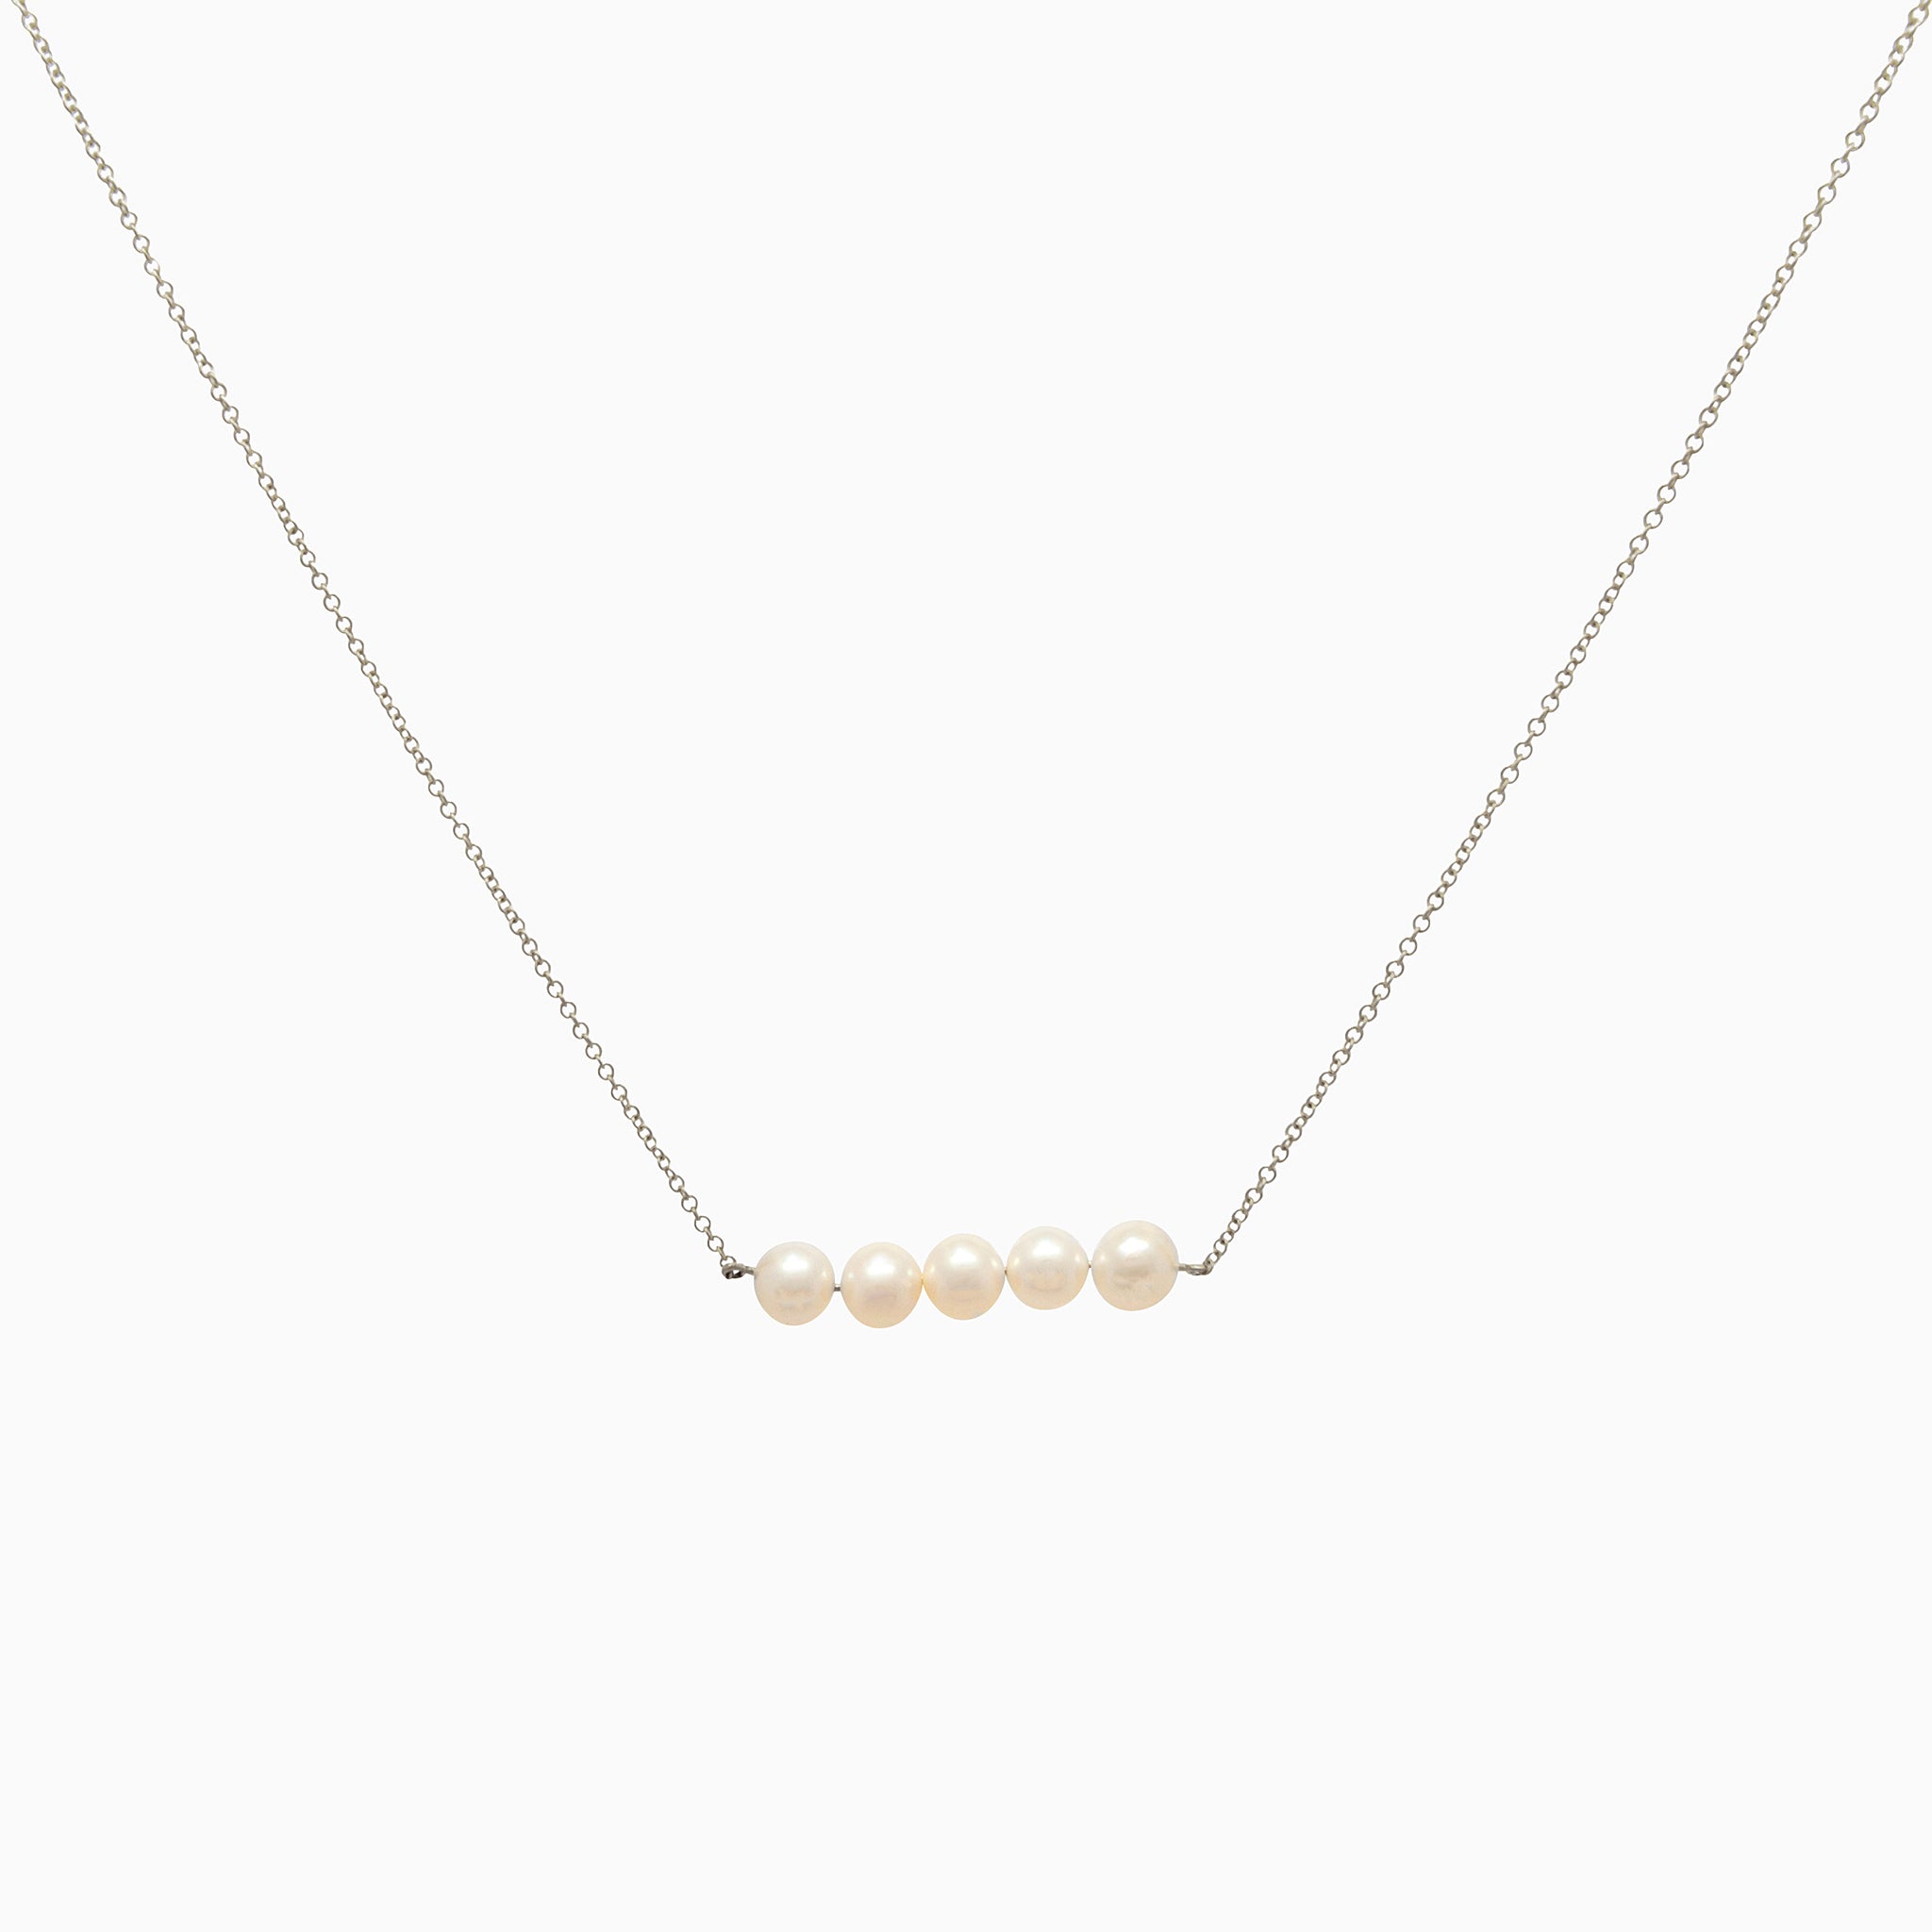 14k White Gold Cultured Freshwater Pearl Bar Necklace